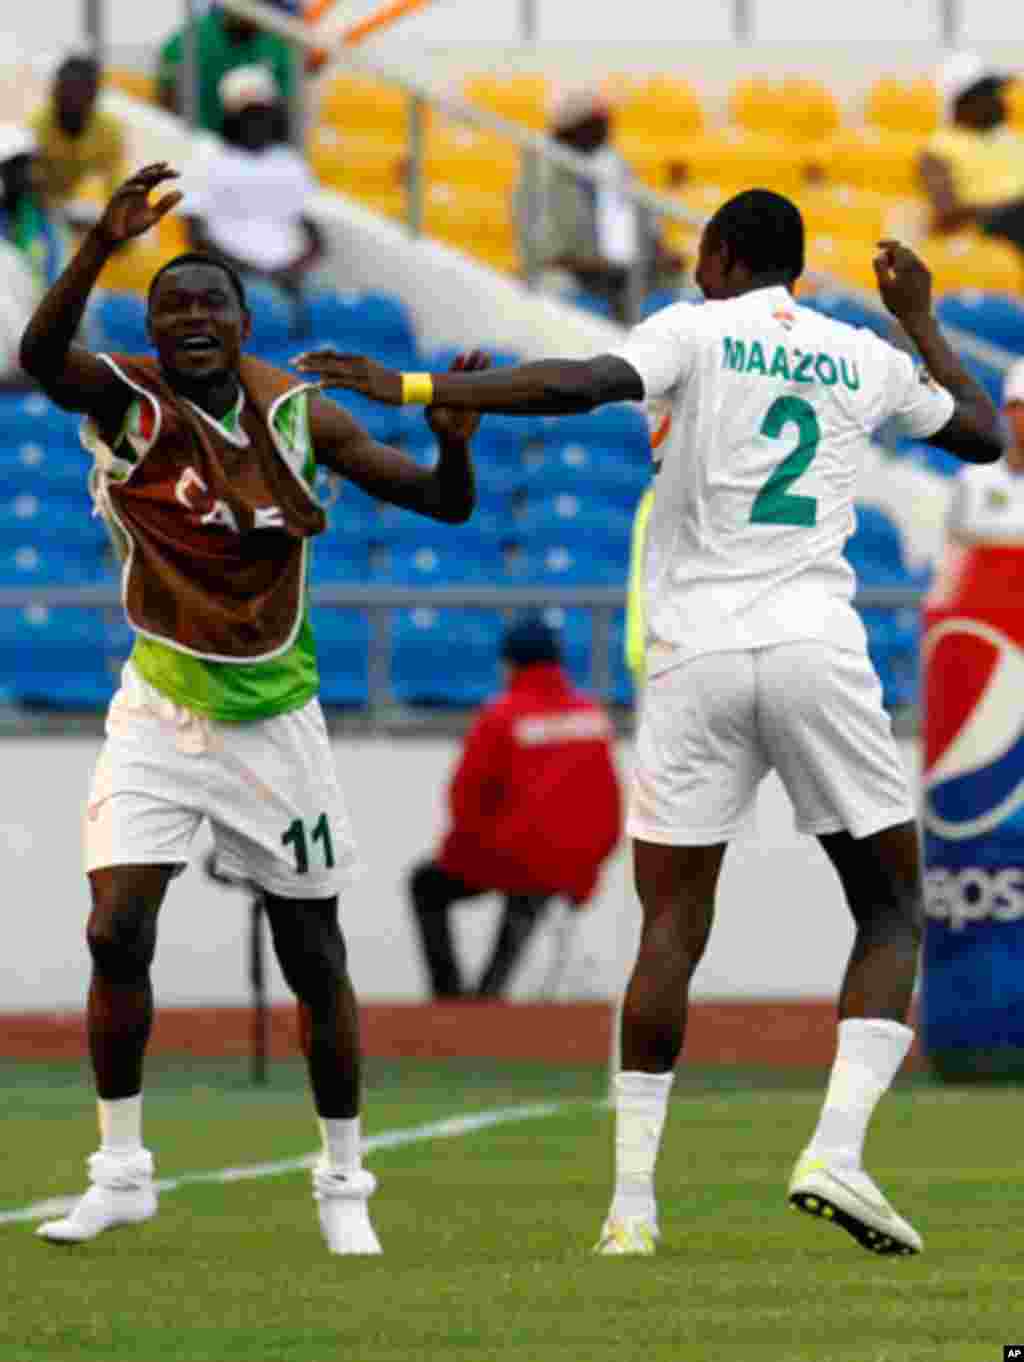 Niger's Moussa celebrates his goal against Tunisia with Allagui during their African Cup of Nations soccer match in Libreville